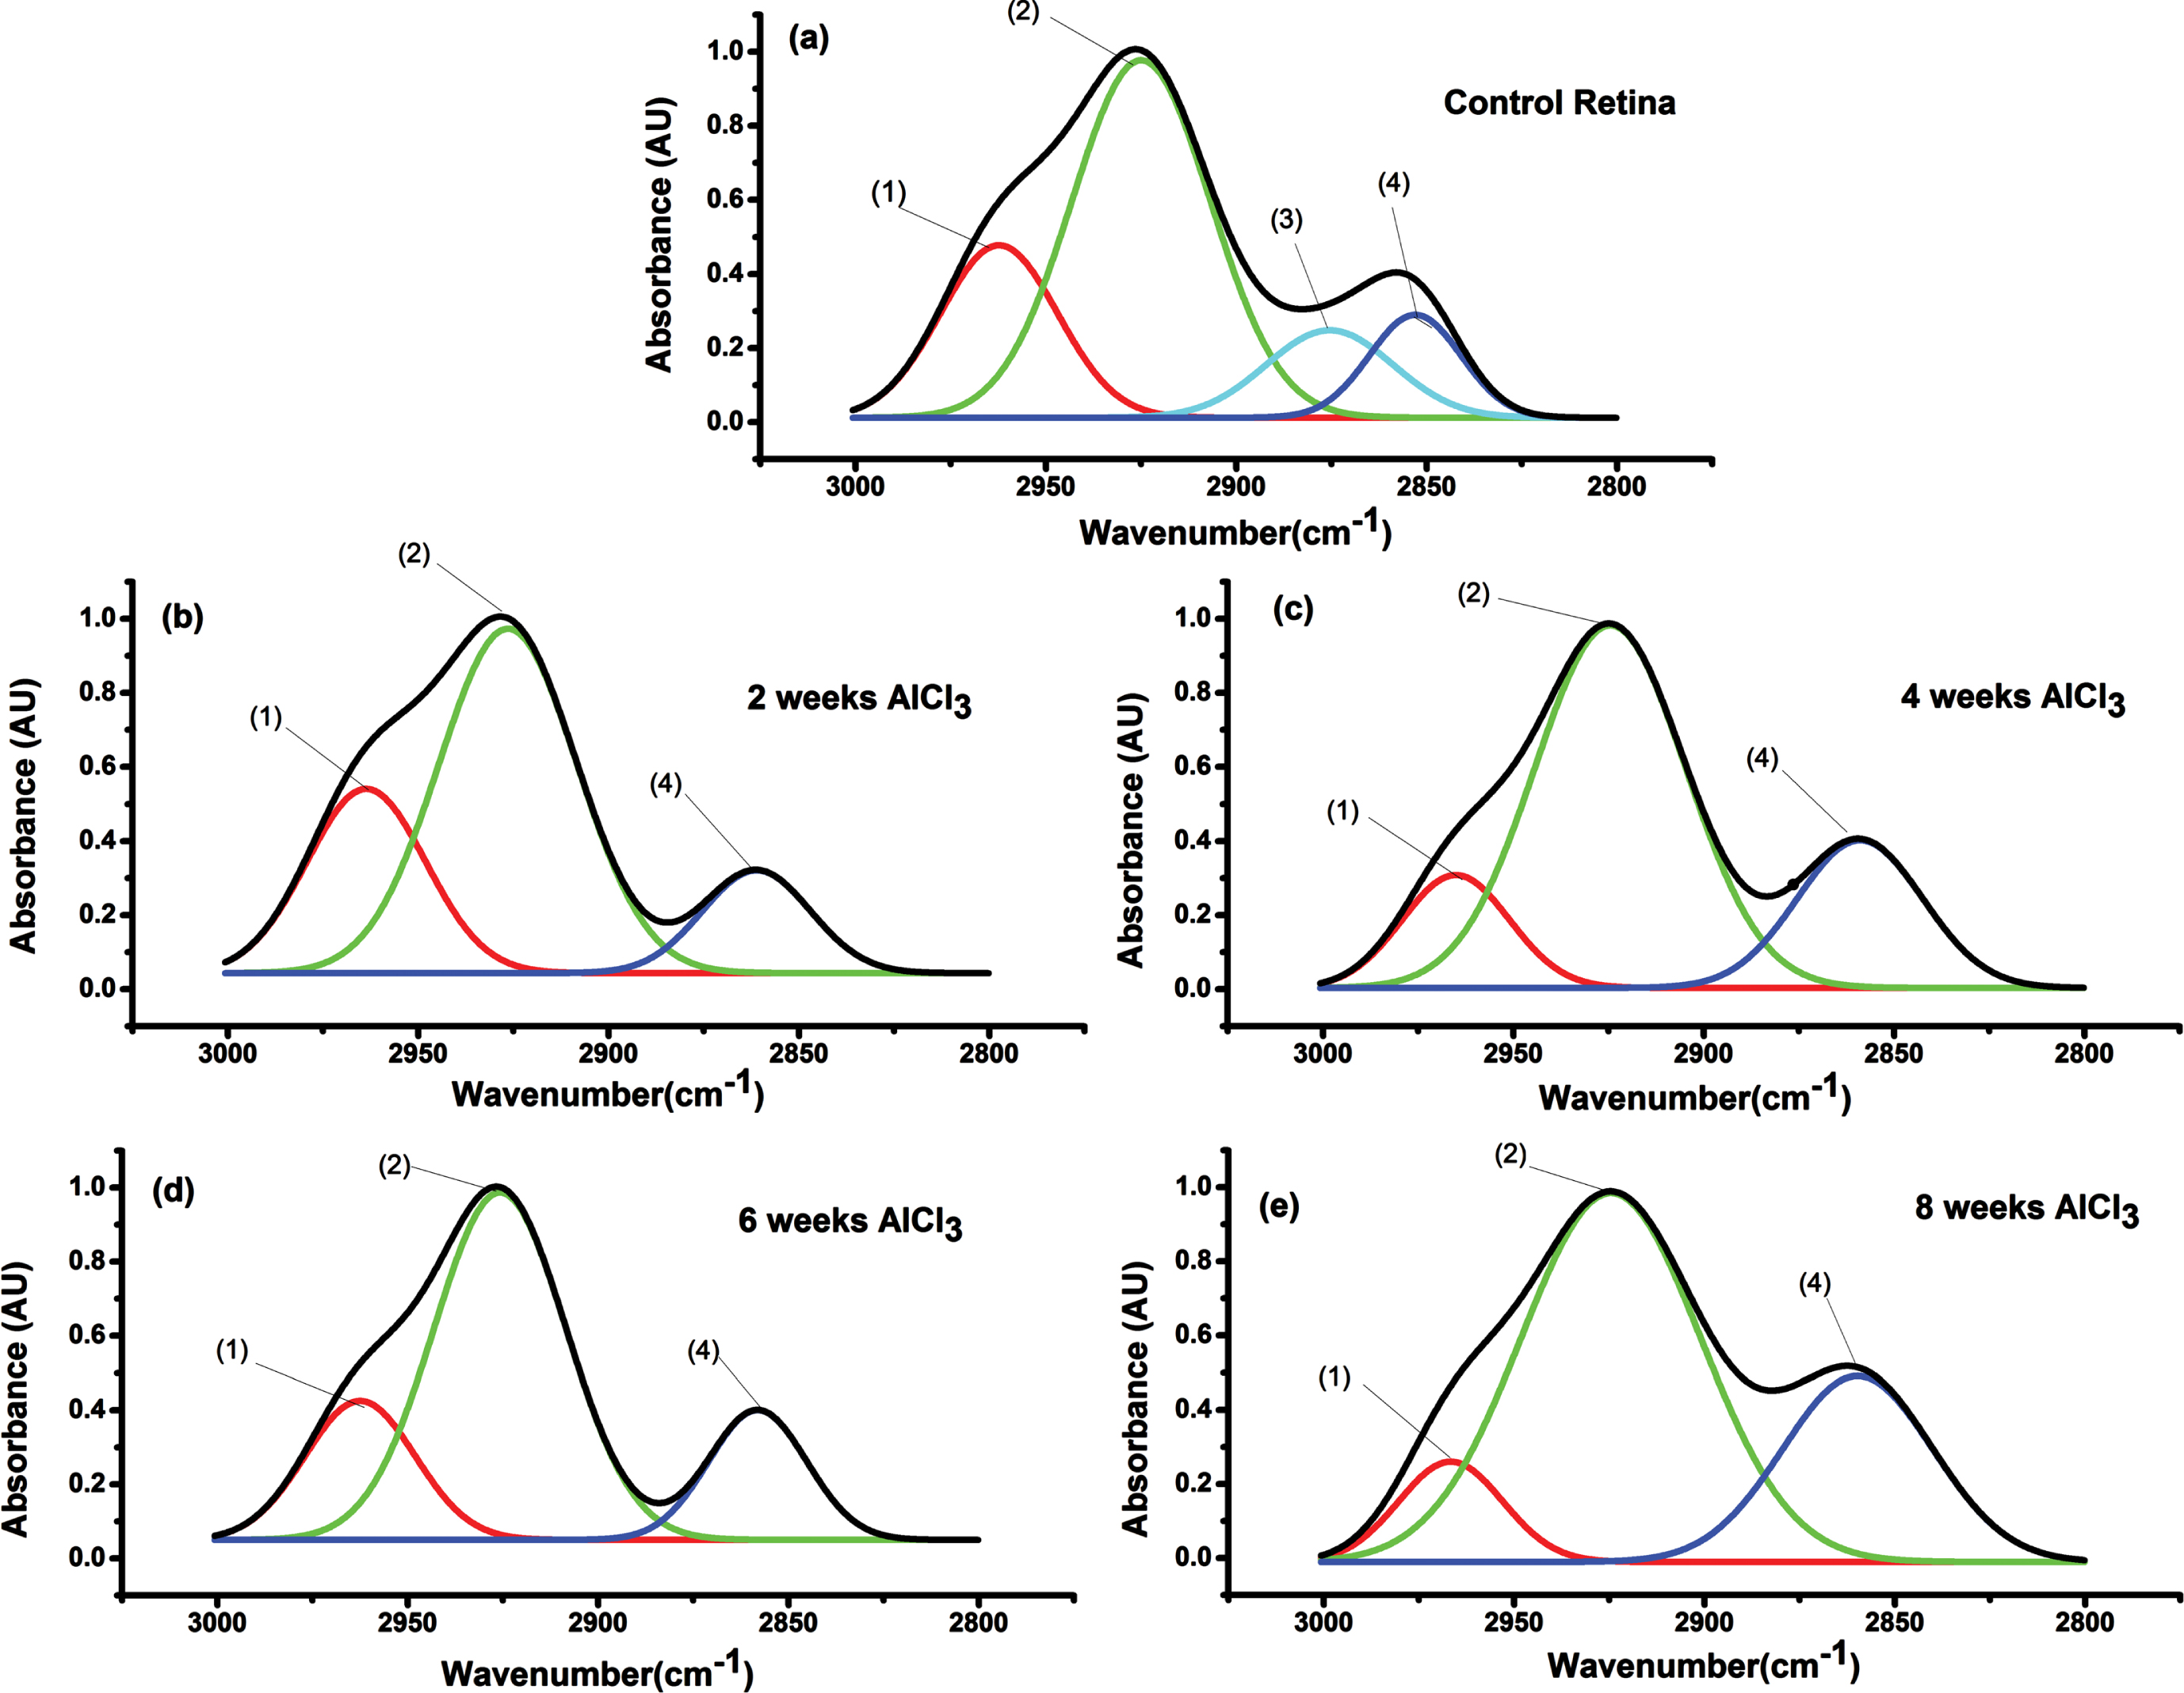 FTIR range (3000-2800 cm–1) of retinal tissue to all groups received AlCl3 compared to control and numbers of peaks to facilitate identification of function groups. (1) asymCH3, (2) asymCH2, (3) symCH3, and (4) symCH2.